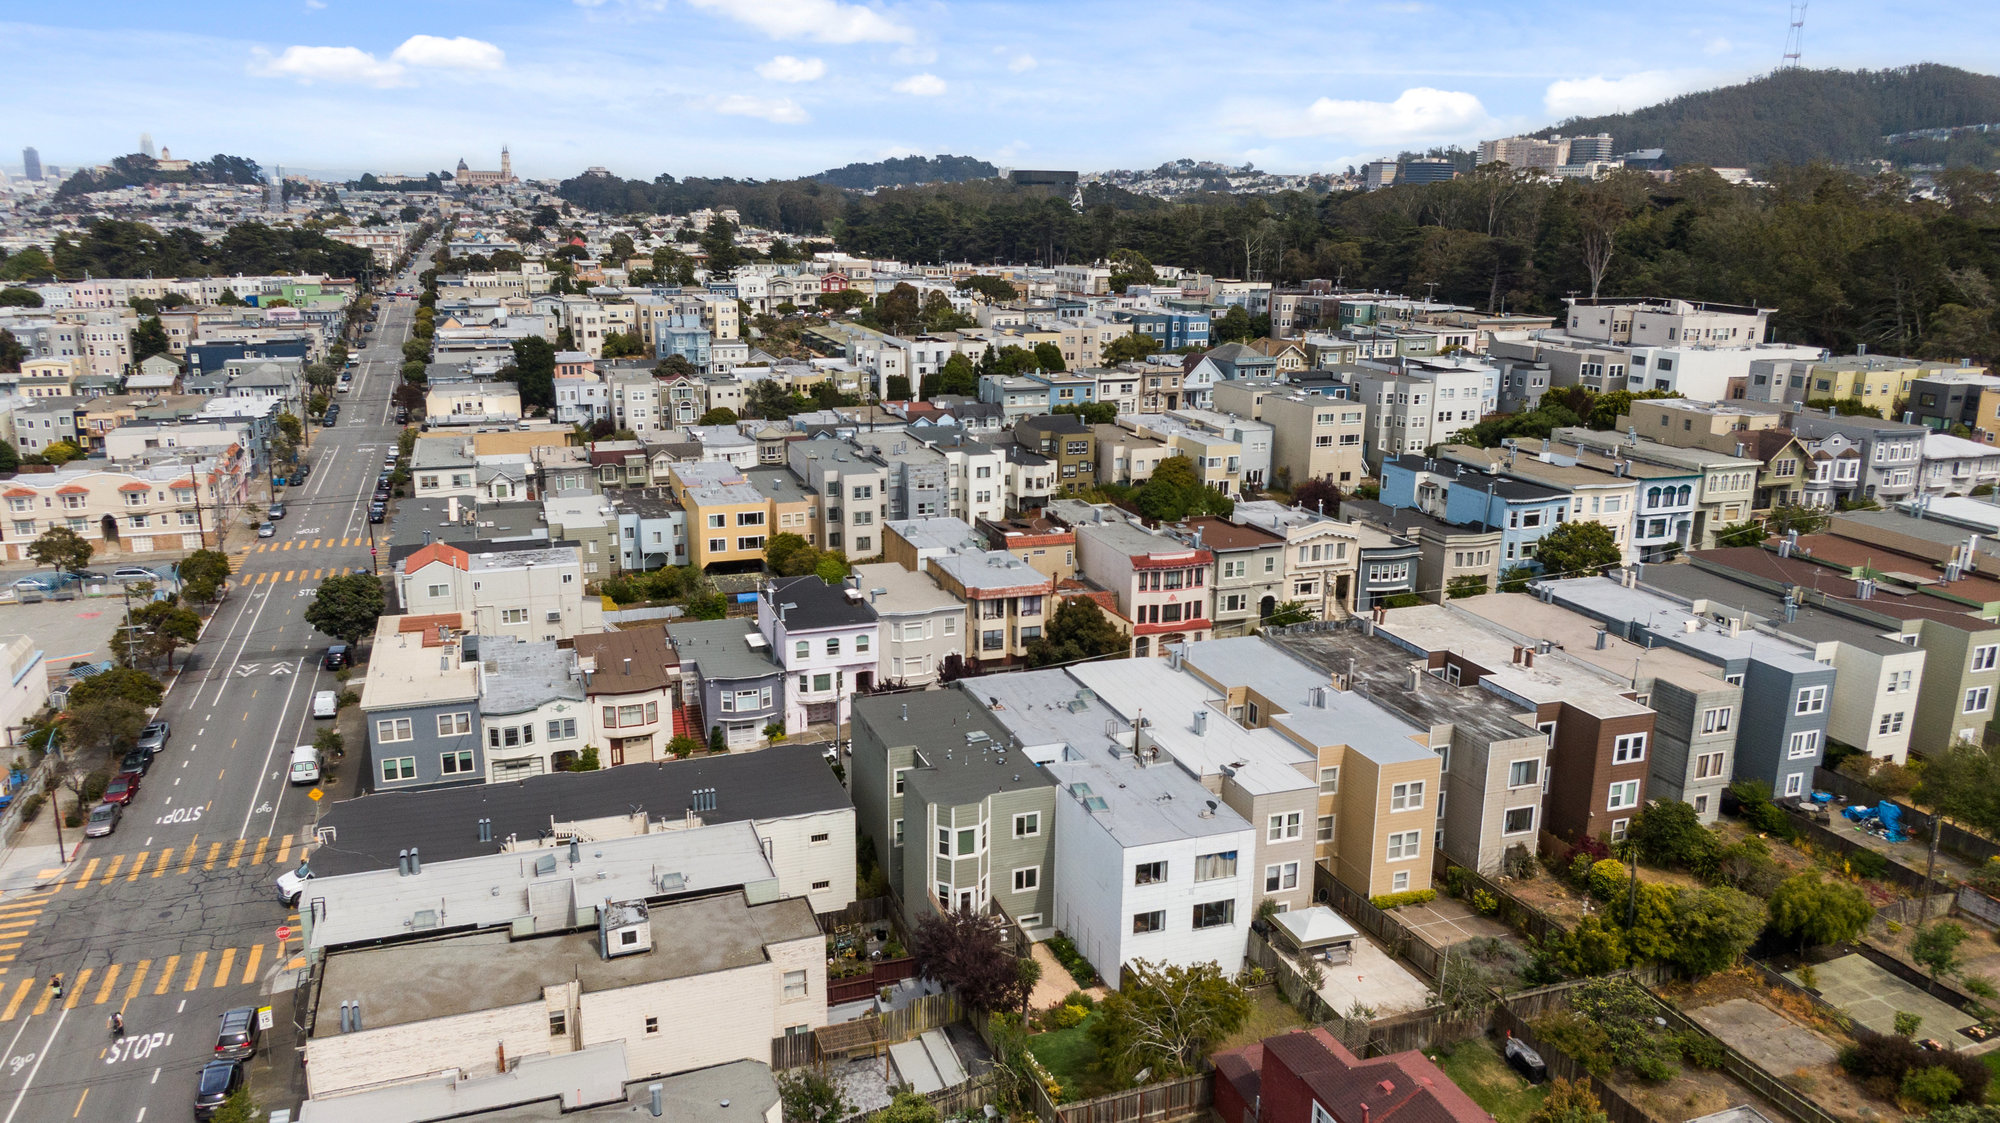 Property Photo: Aerial view of 719 18th Avenue, showing Sutro Tower, and the Mission in the distance